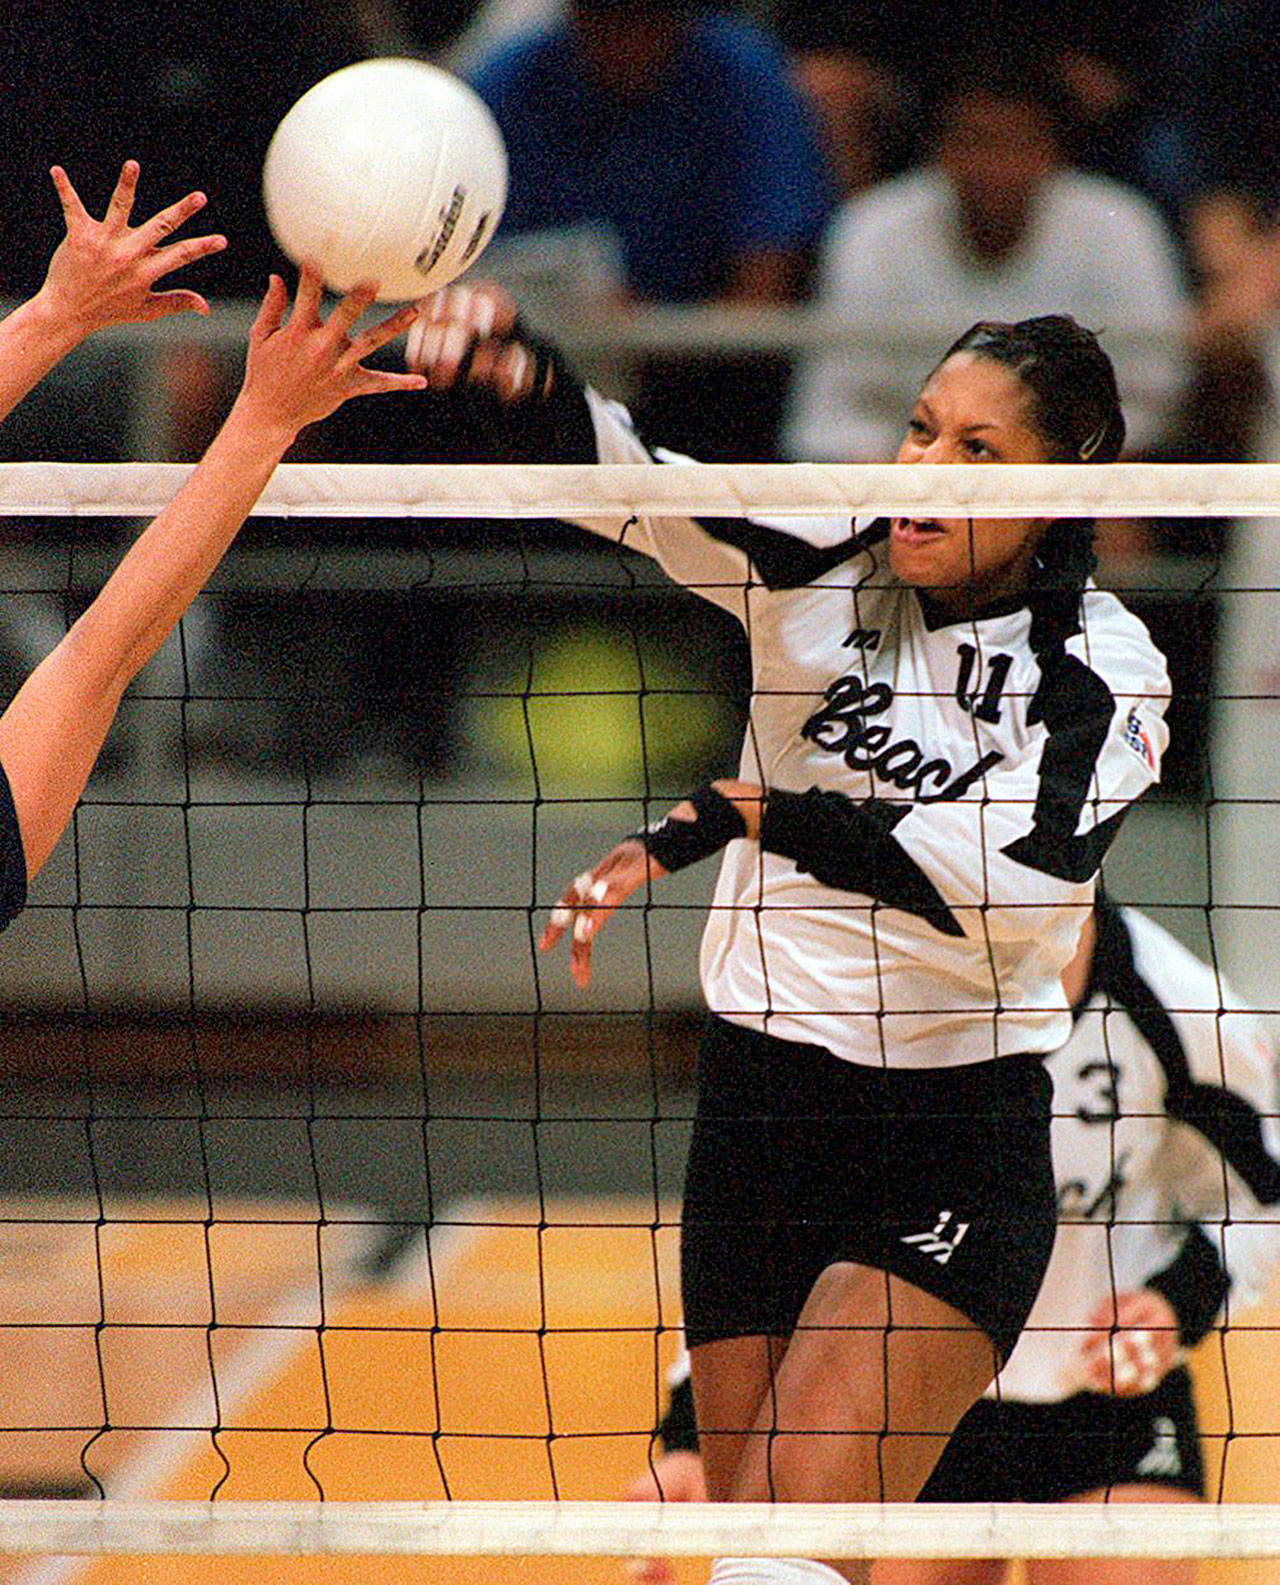 Benishe Dillard-Roberts fires back a shot during her career at Long Beach State. She was the 49ers’ main force, leading the team with 405 kills in 1998 en route to an undefeated season and NCAA championship. COURTESY PHOTO, LBSU Athletics